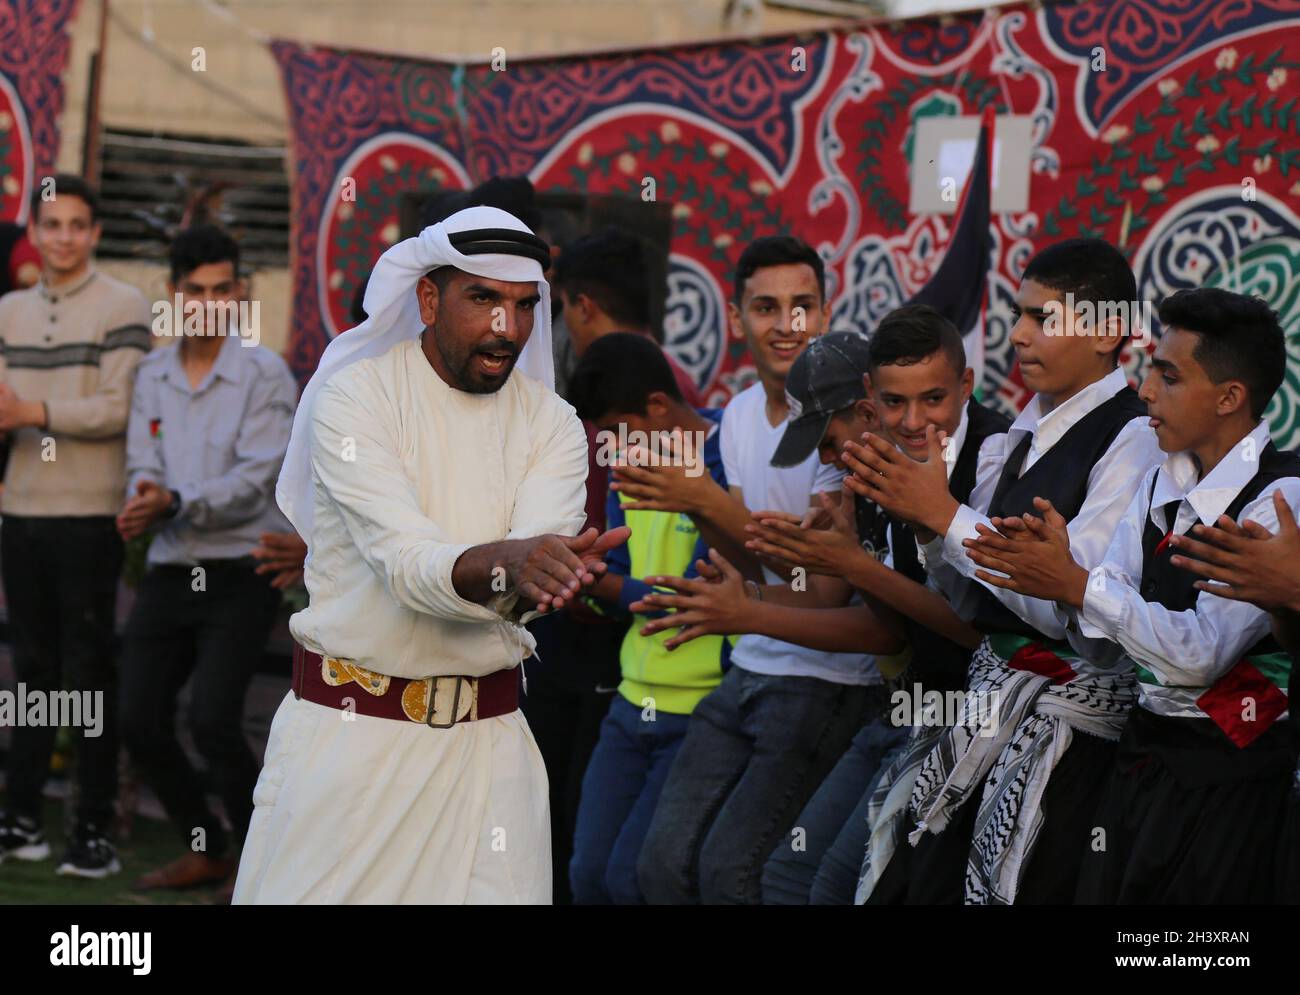 Gaza. 30th Oct, 2021. Palestinian people perform during a heritage festival in Khuza'a, east of southern Gaza Strip city of Khan Younis, on Oct. 30, 2021. Credit: Yasser Qudih/Xinhua/Alamy Live News Stock Photo